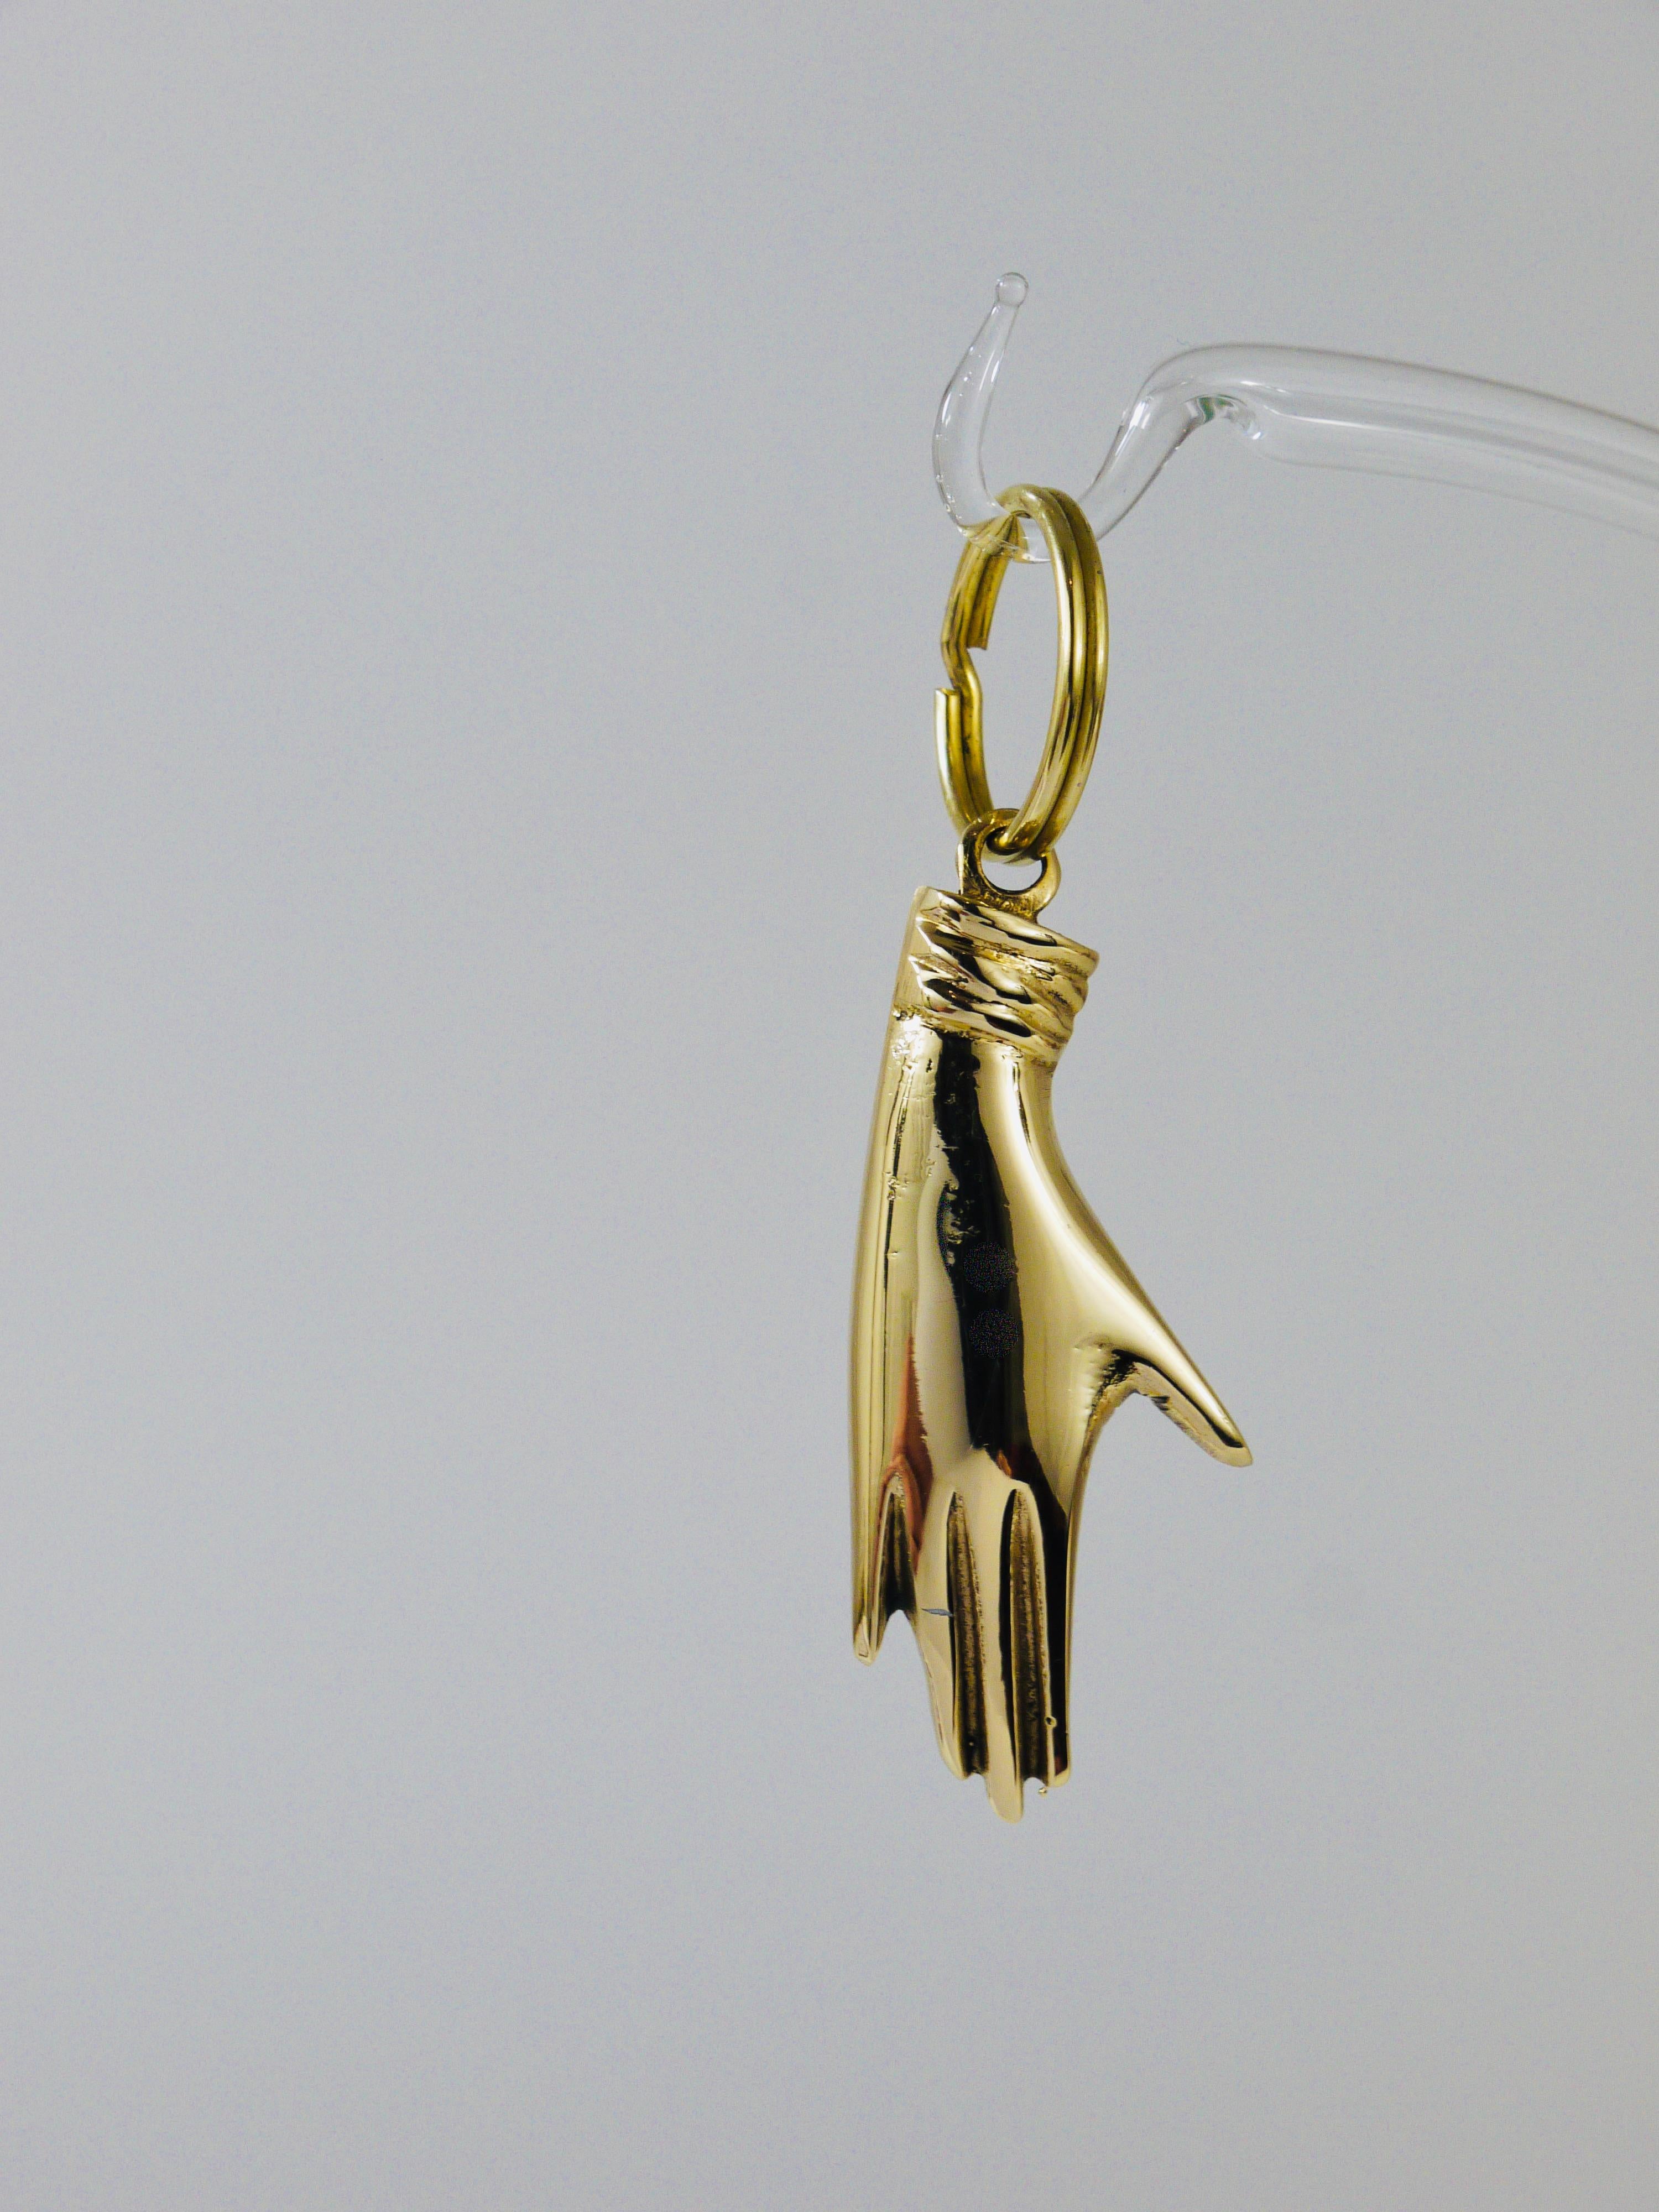 Brass Carl Auböck Handcrafted Midcentury Hand Figurine Key Ring Chain Holder For Sale